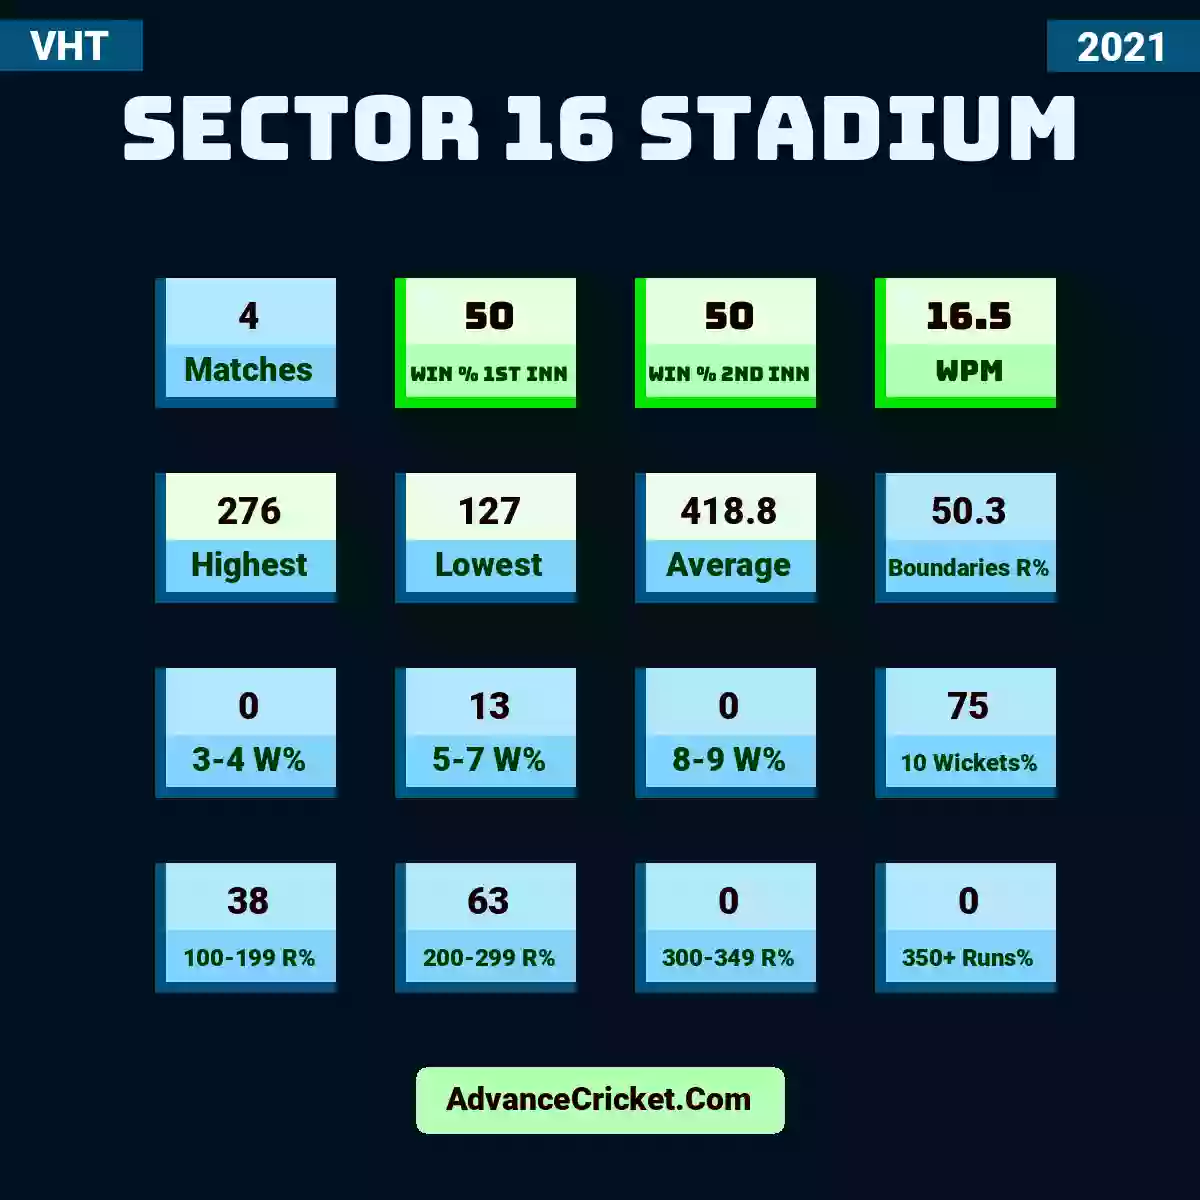 Image showing Sector 16 Stadium with Matches: 4, Win % 1st Inn: 50, Win % 2nd Inn: 50, WPM: 16.5, Highest: 276, Lowest: 127, Average: 418.8, Boundaries R%: 50.3, 3-4 W%: 0, 5-7 W%: 13, 8-9 W%: 0, 10 Wickets%: 75, 100-199 R%: 38, 200-299 R%: 63, 300-349 R%: 0, 350+ Runs%: 0.